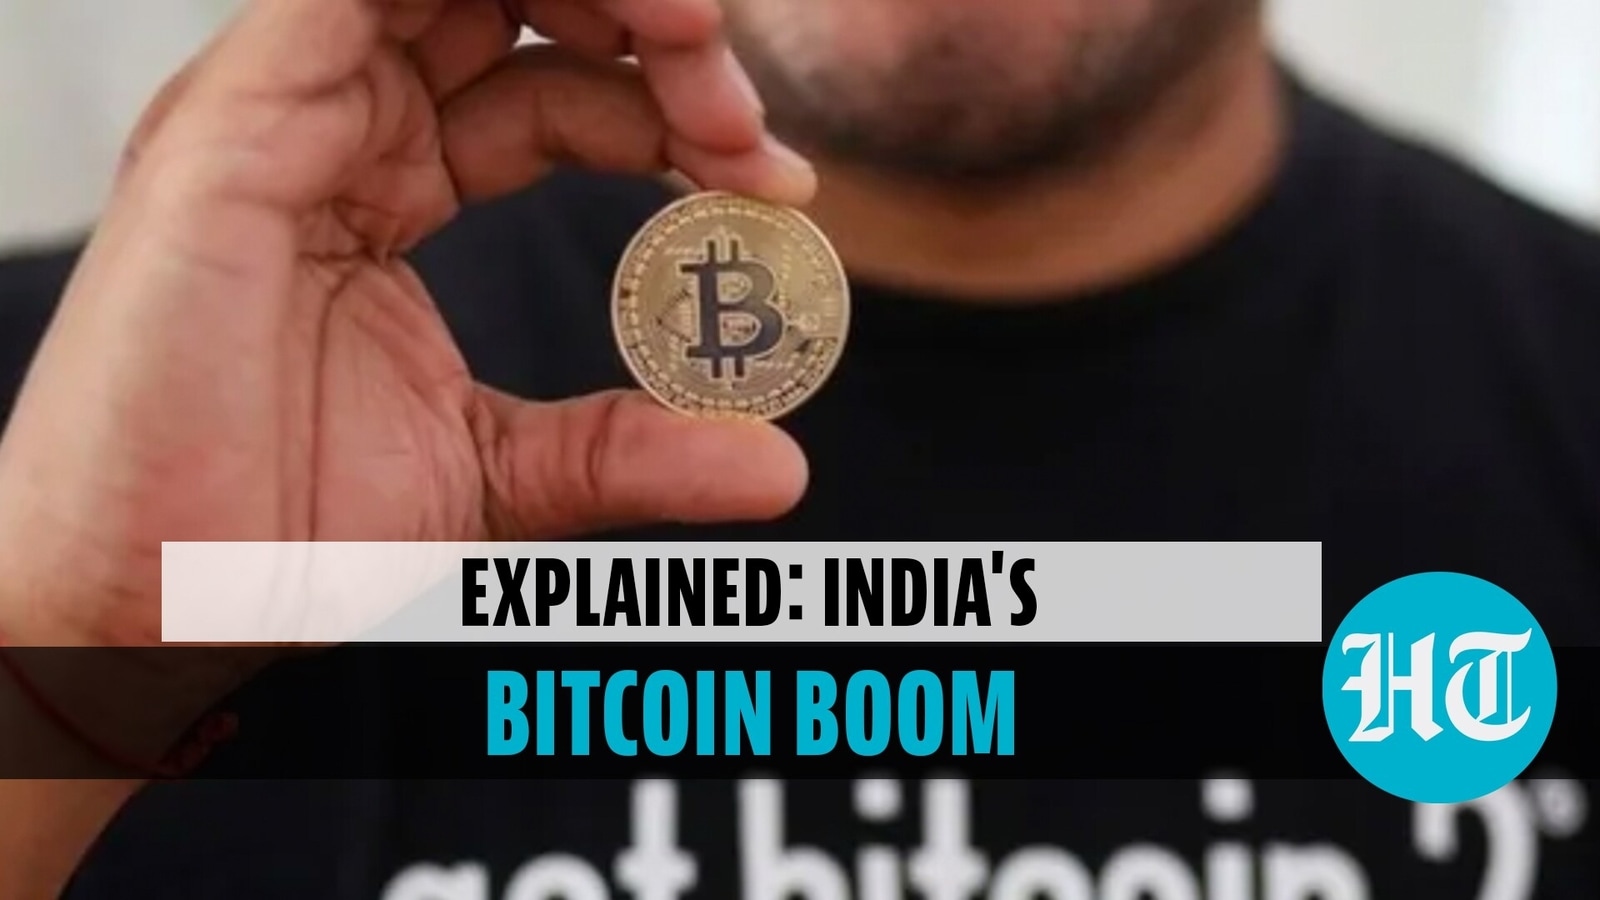 indians are buying bitcoin using cash